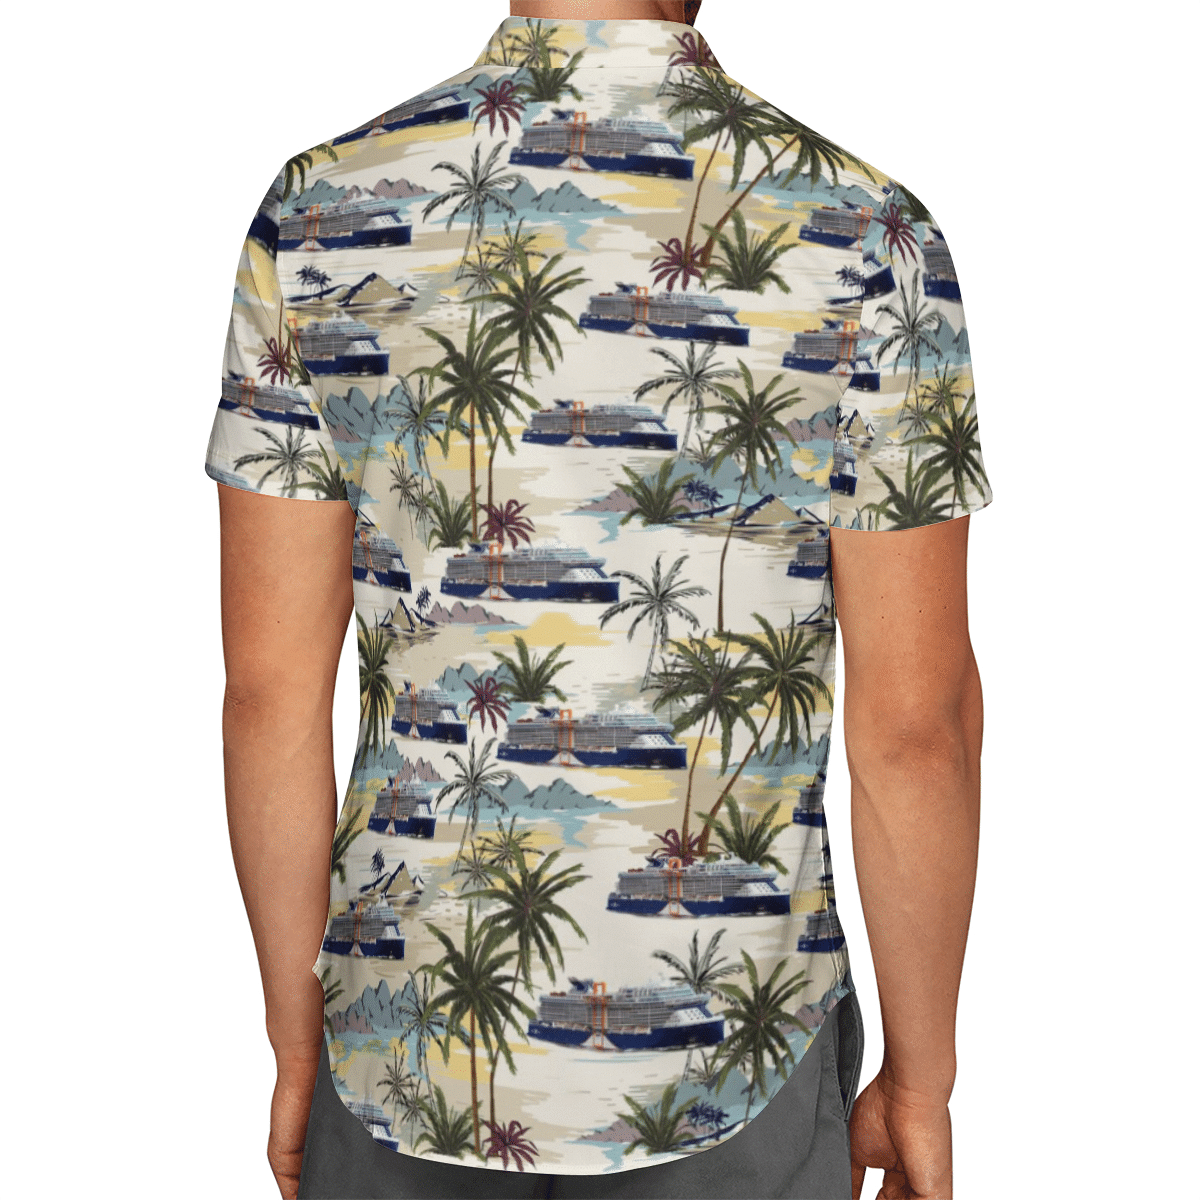 Going to the beach with a quality shirt 50